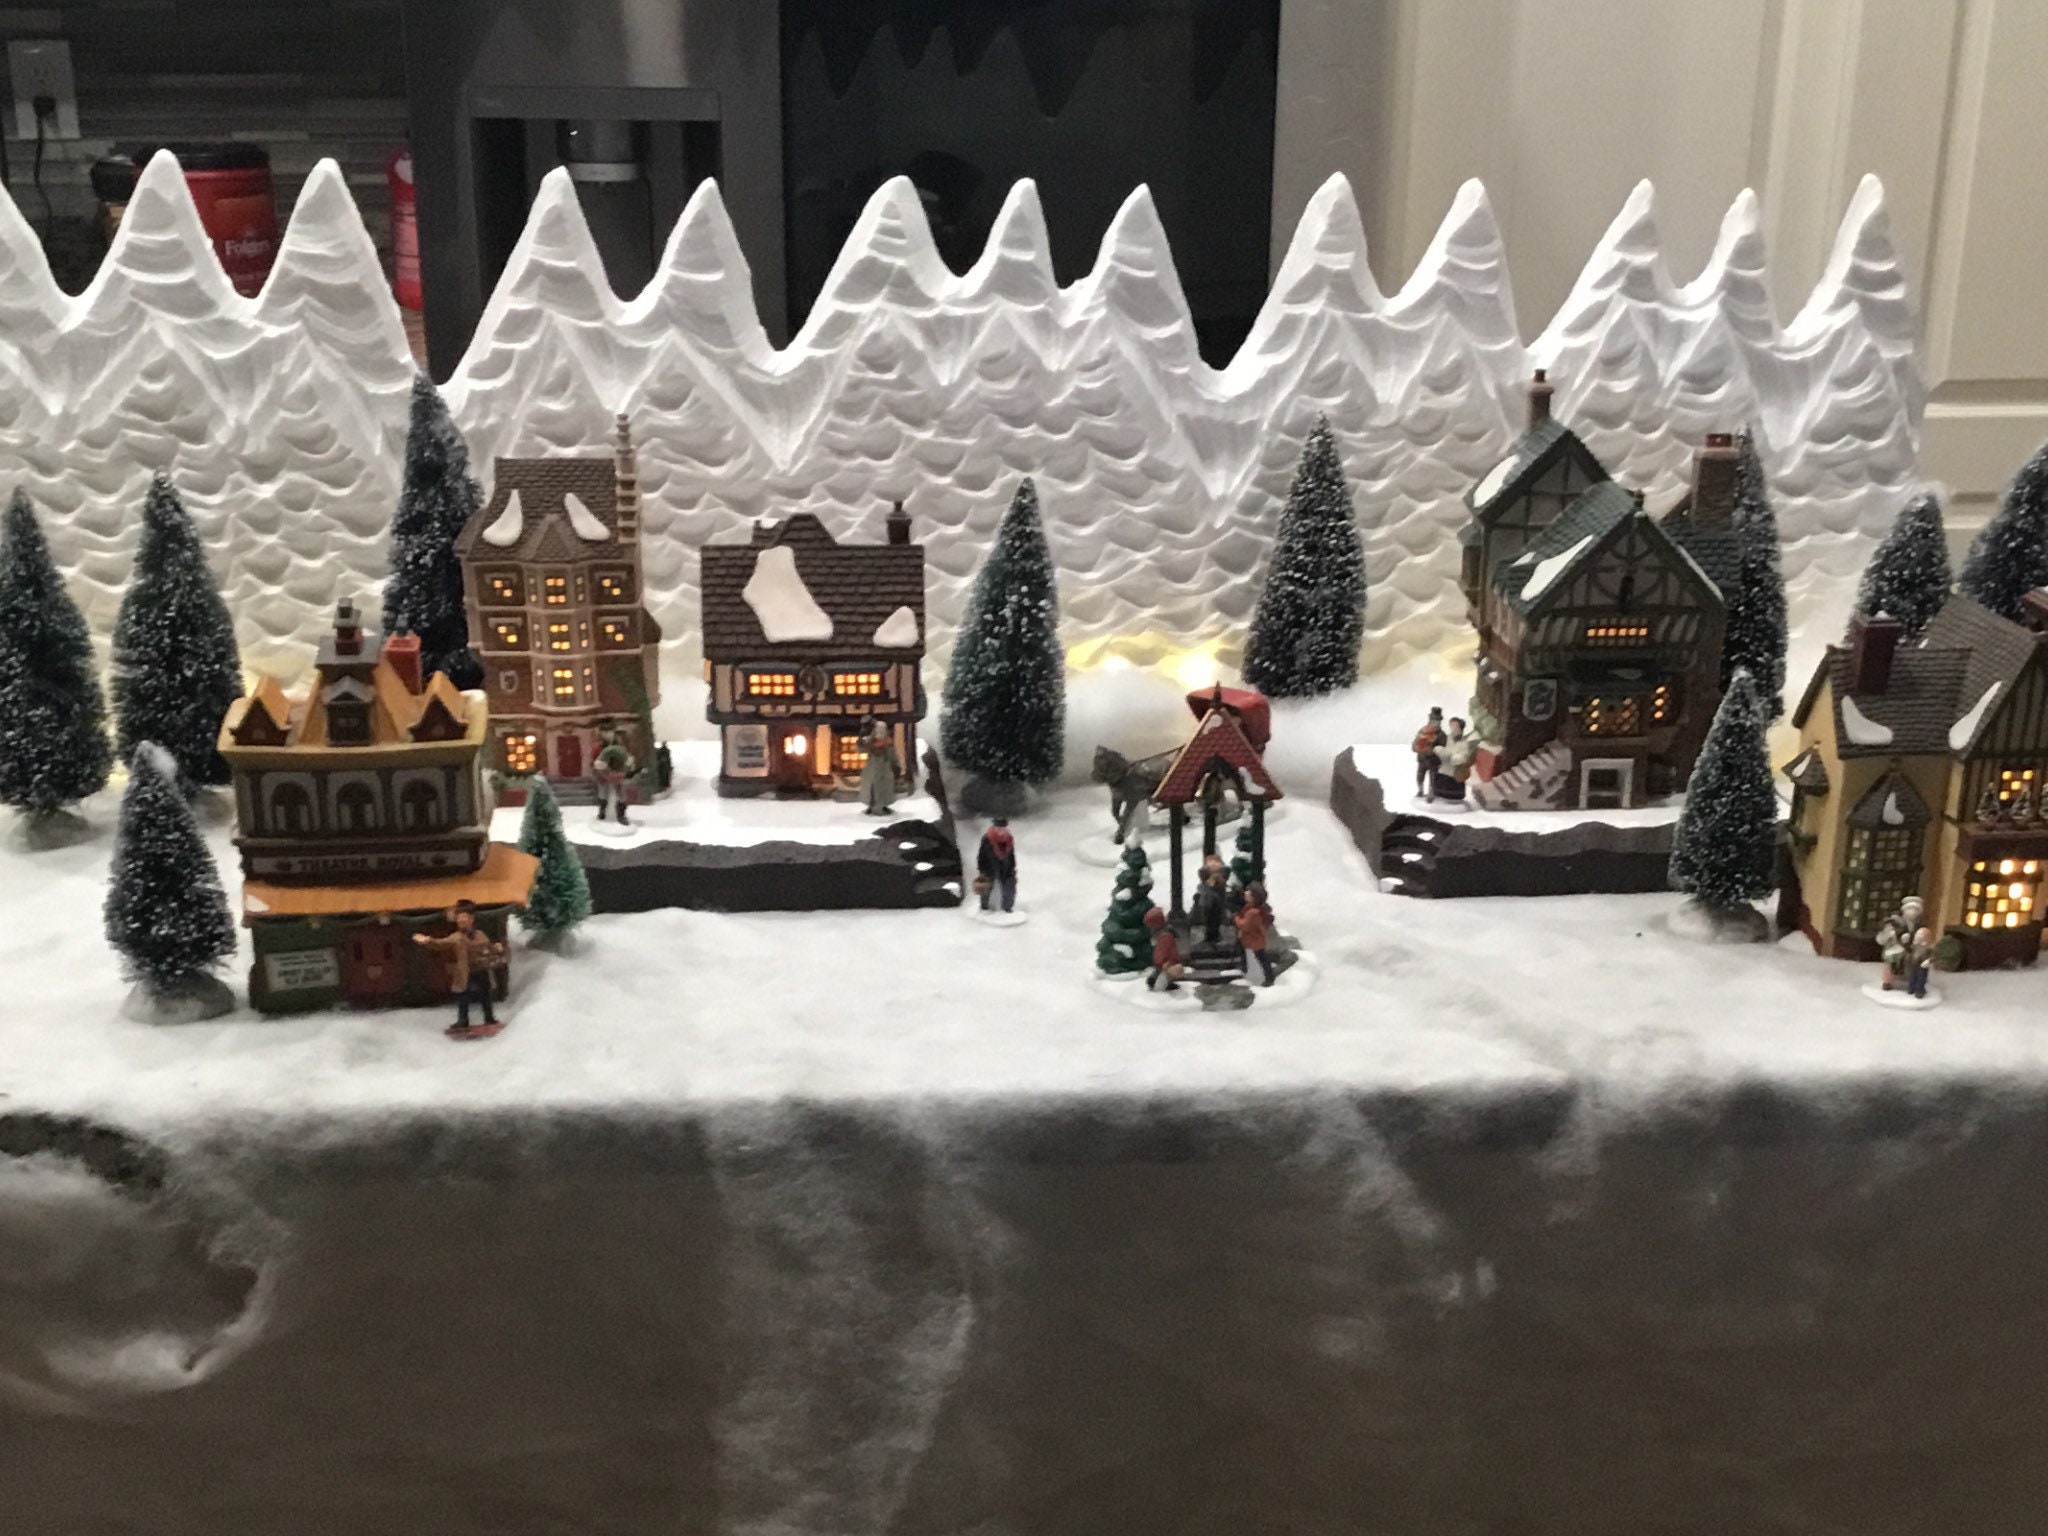 Christmas Village Display Platform Large 4 Feet Long Great Size for Lemax  Dept 56 Dickens Snow Village North Pole and Other Collections 